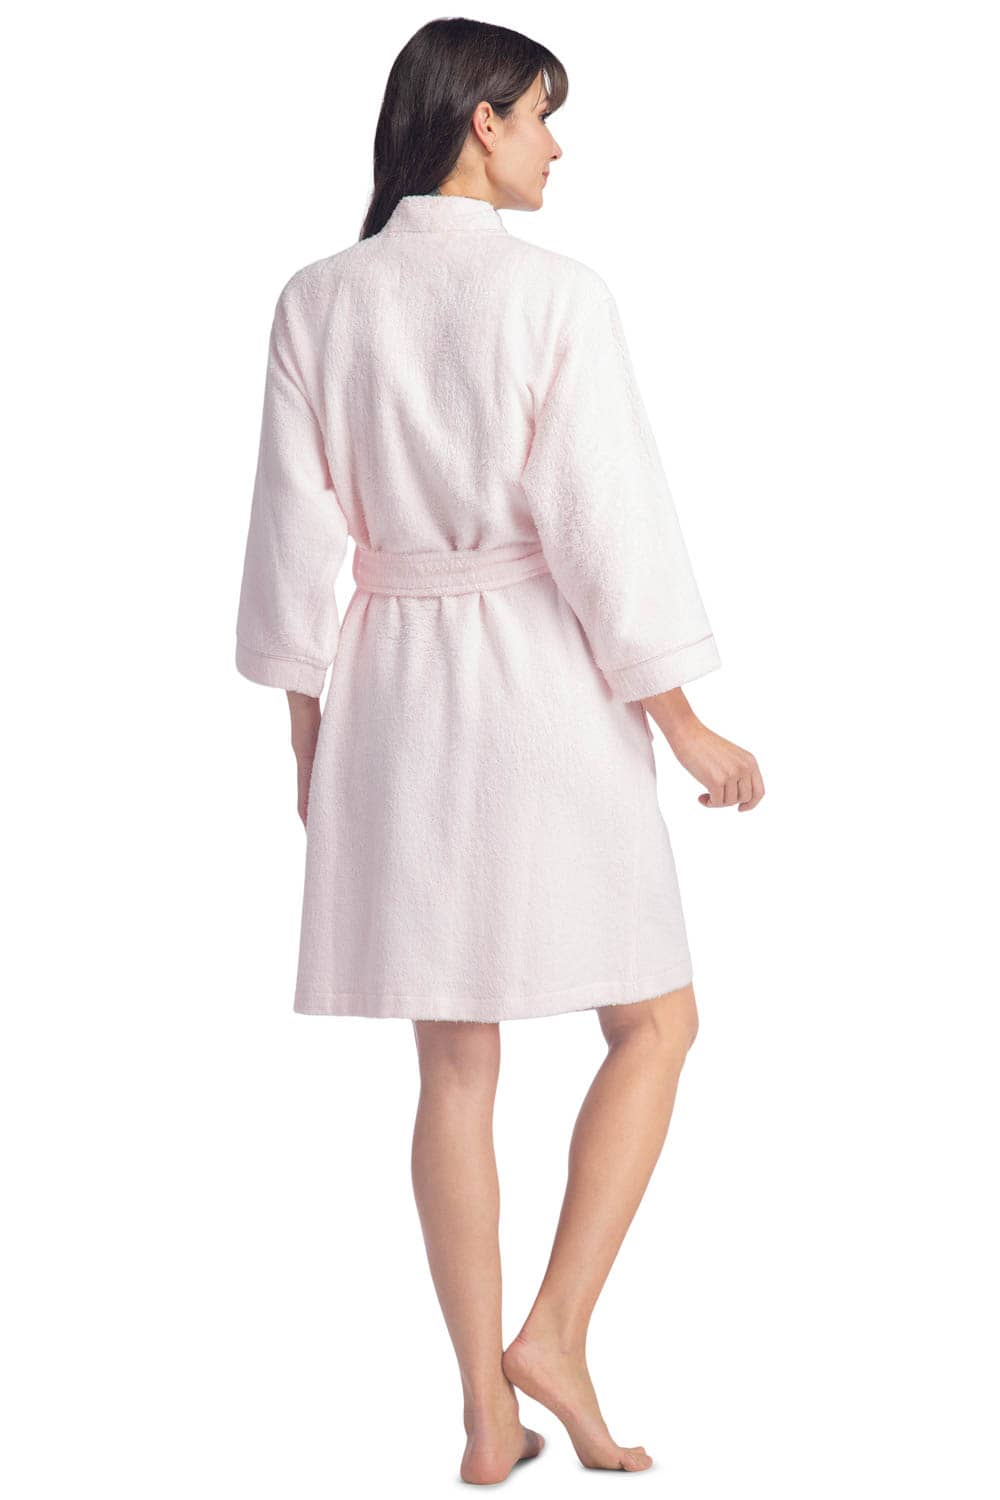 Women's Robes | Terry Cloth Kimono Style Short Robe | Fishers Finery